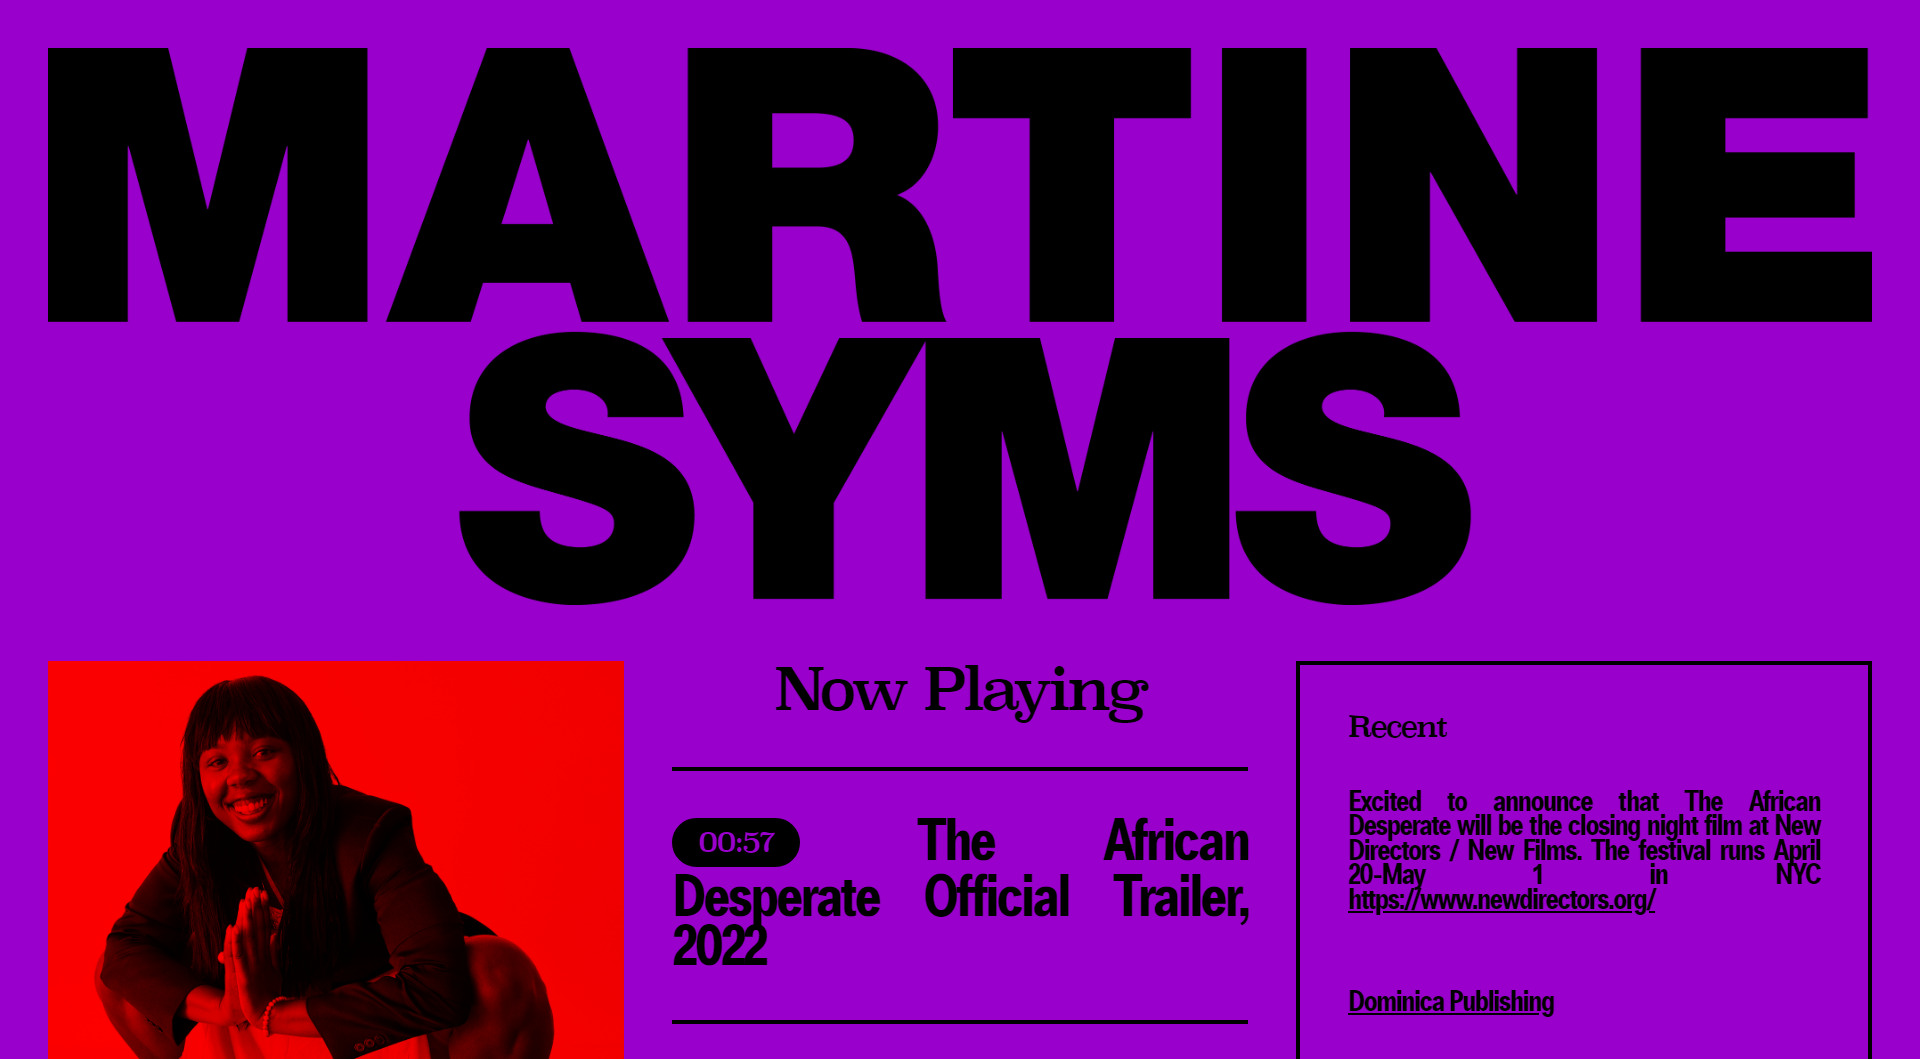 Typography Inspiration In Web Design - Martine Syms